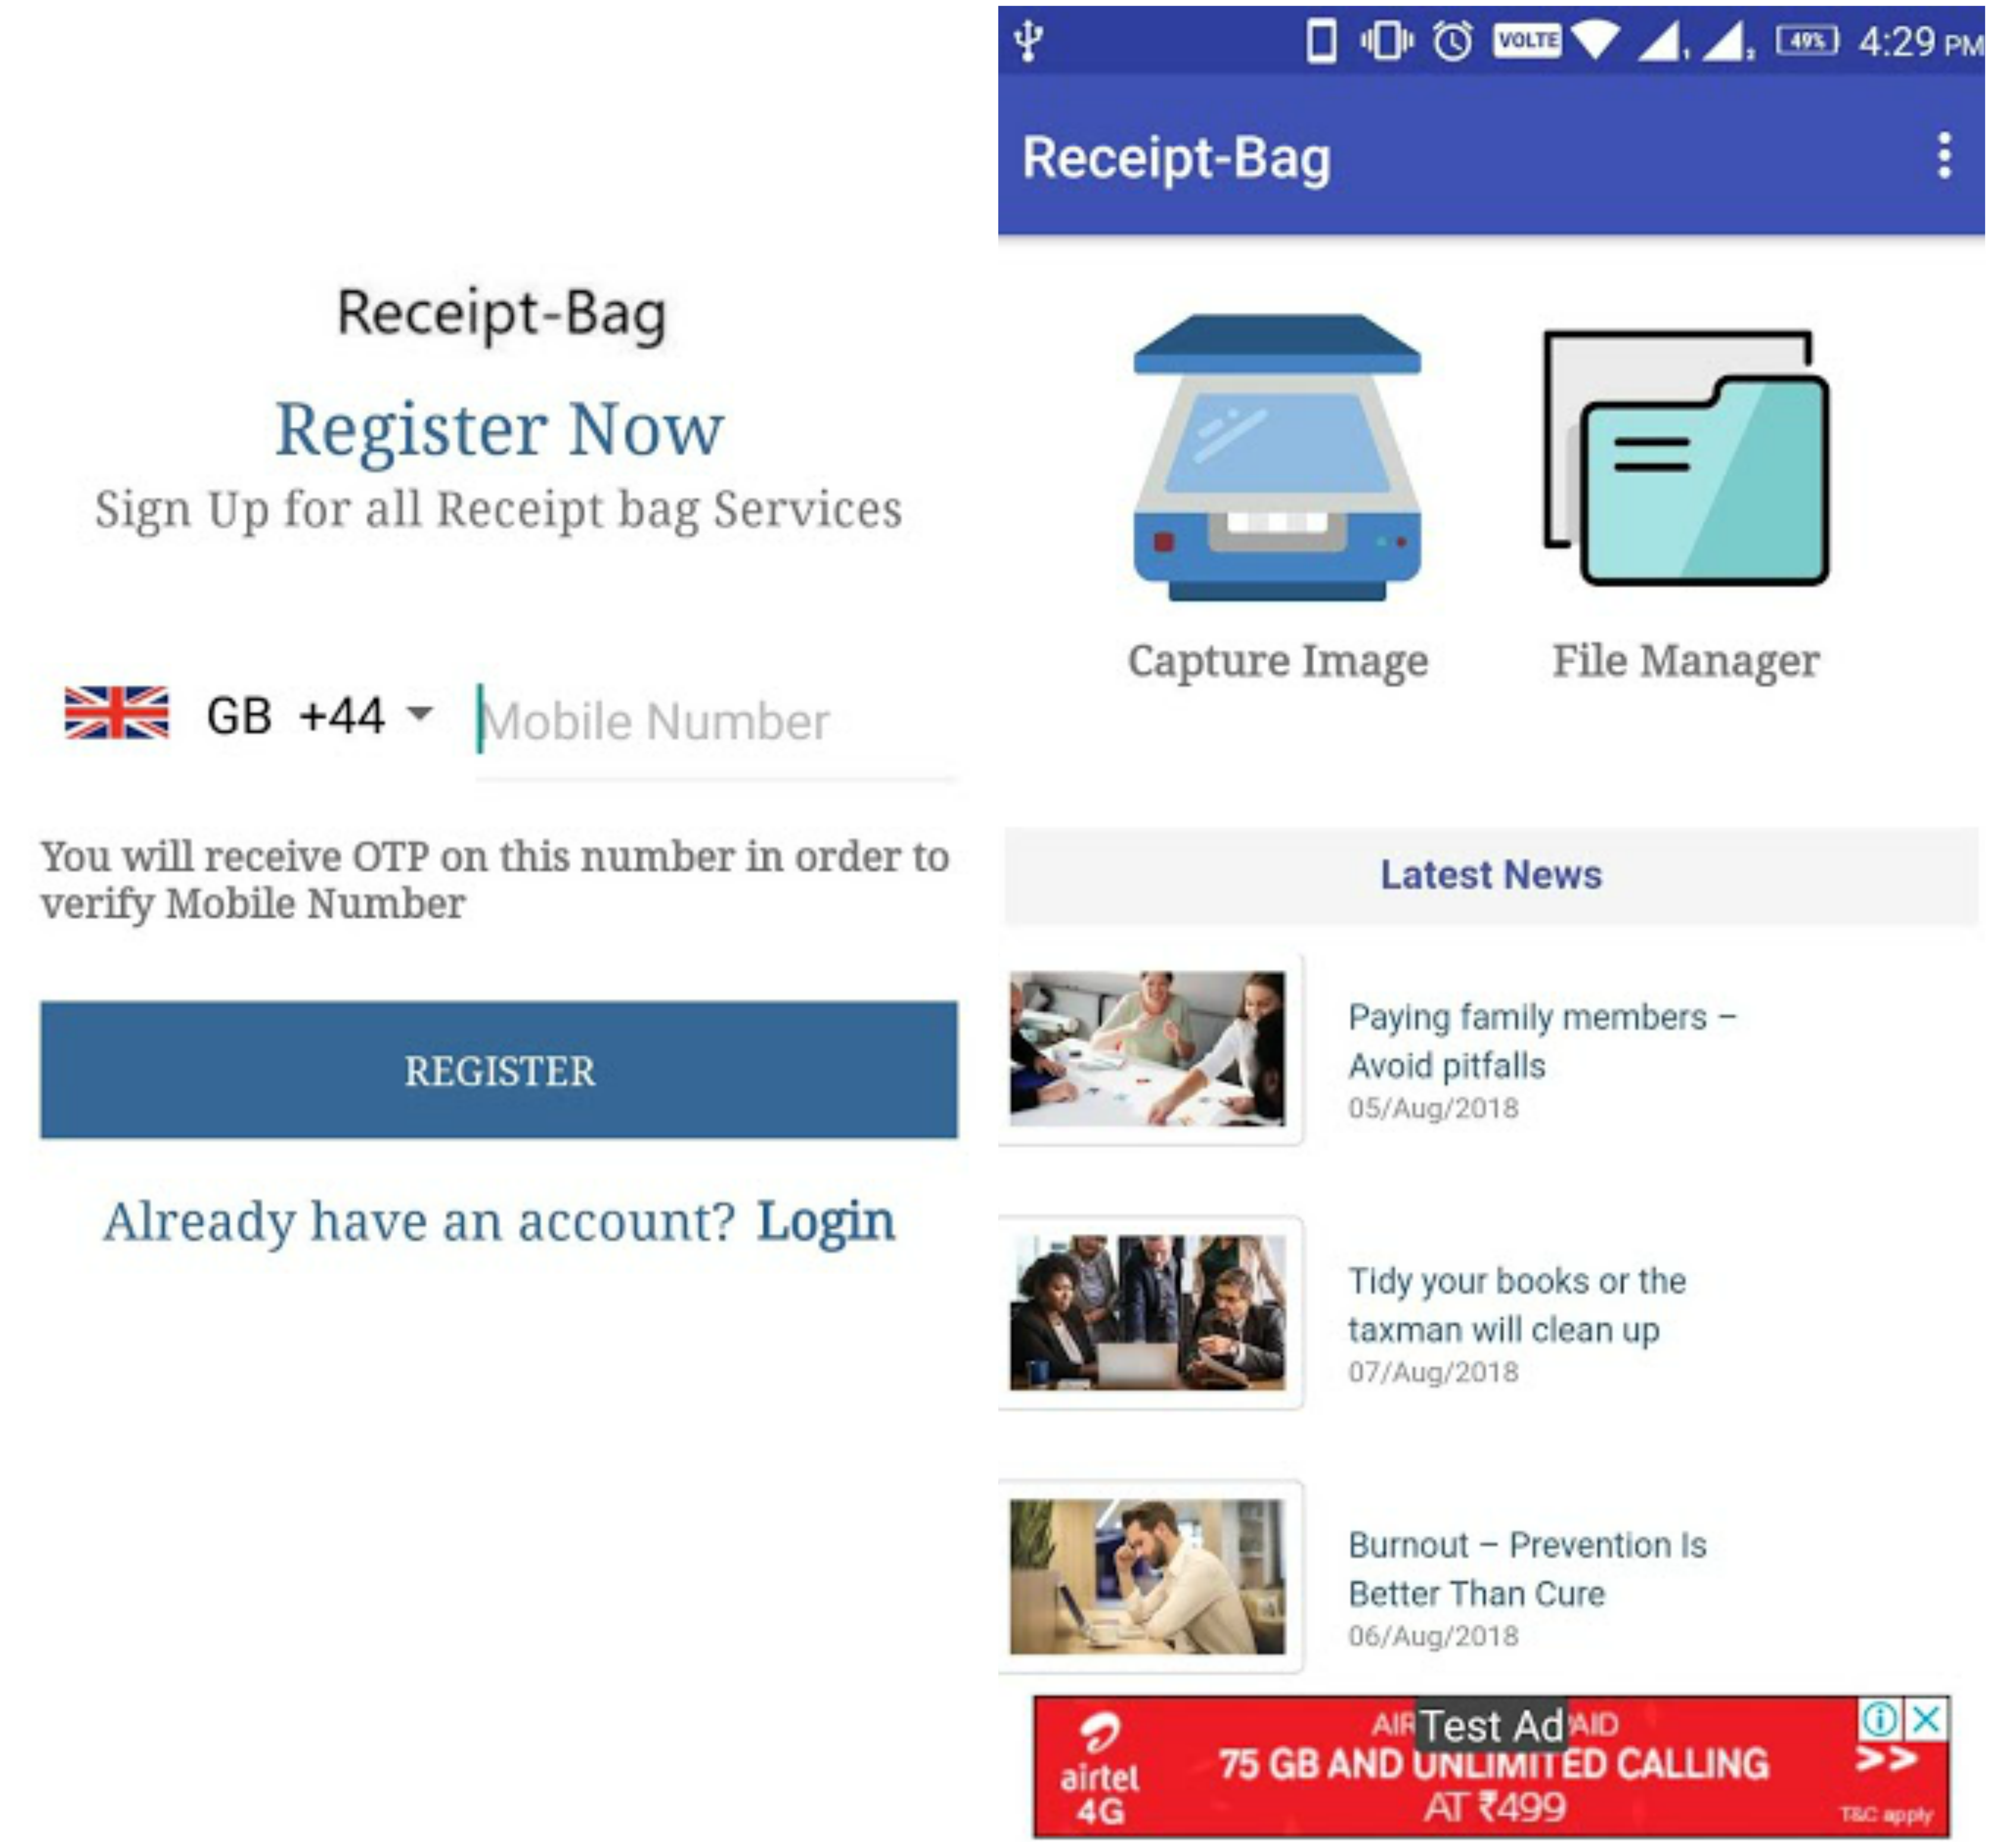 Receipt-Bag Document Scanner (Android /iOS Application)